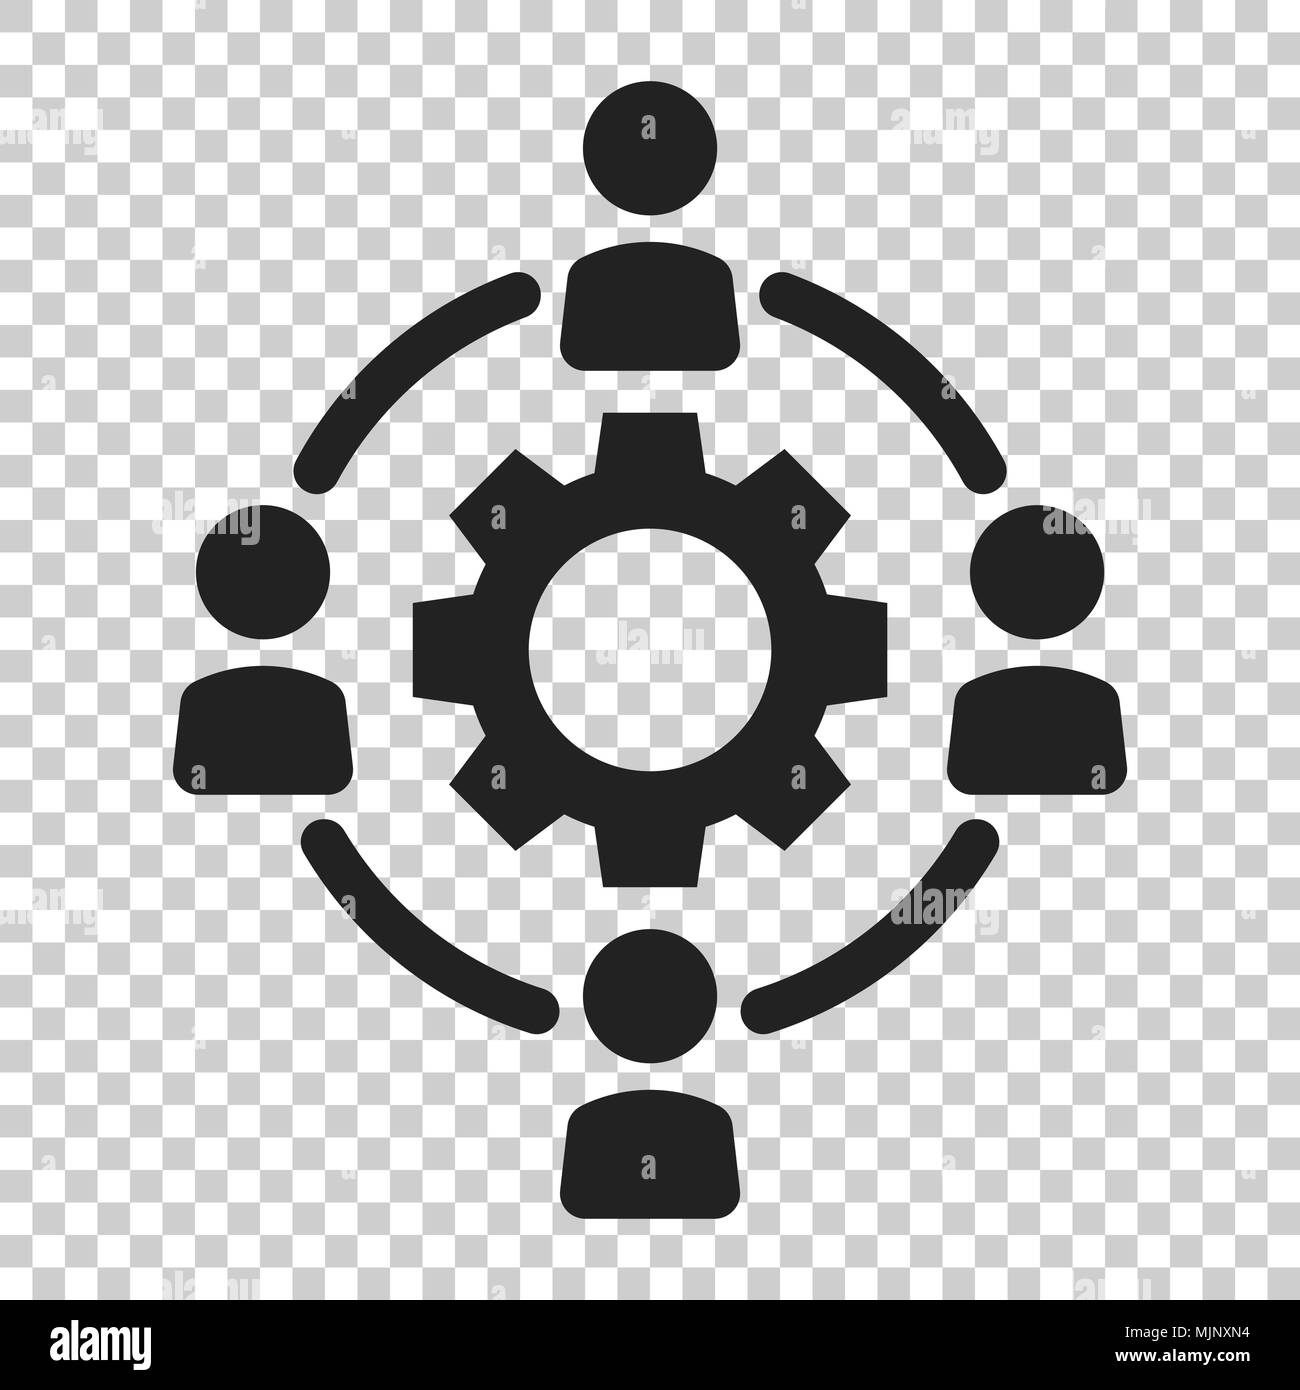 Outsourcing business collaboration vector icon in flat style. People cooperation illustration on isolated transparent background. Teamwork business co Stock Vector